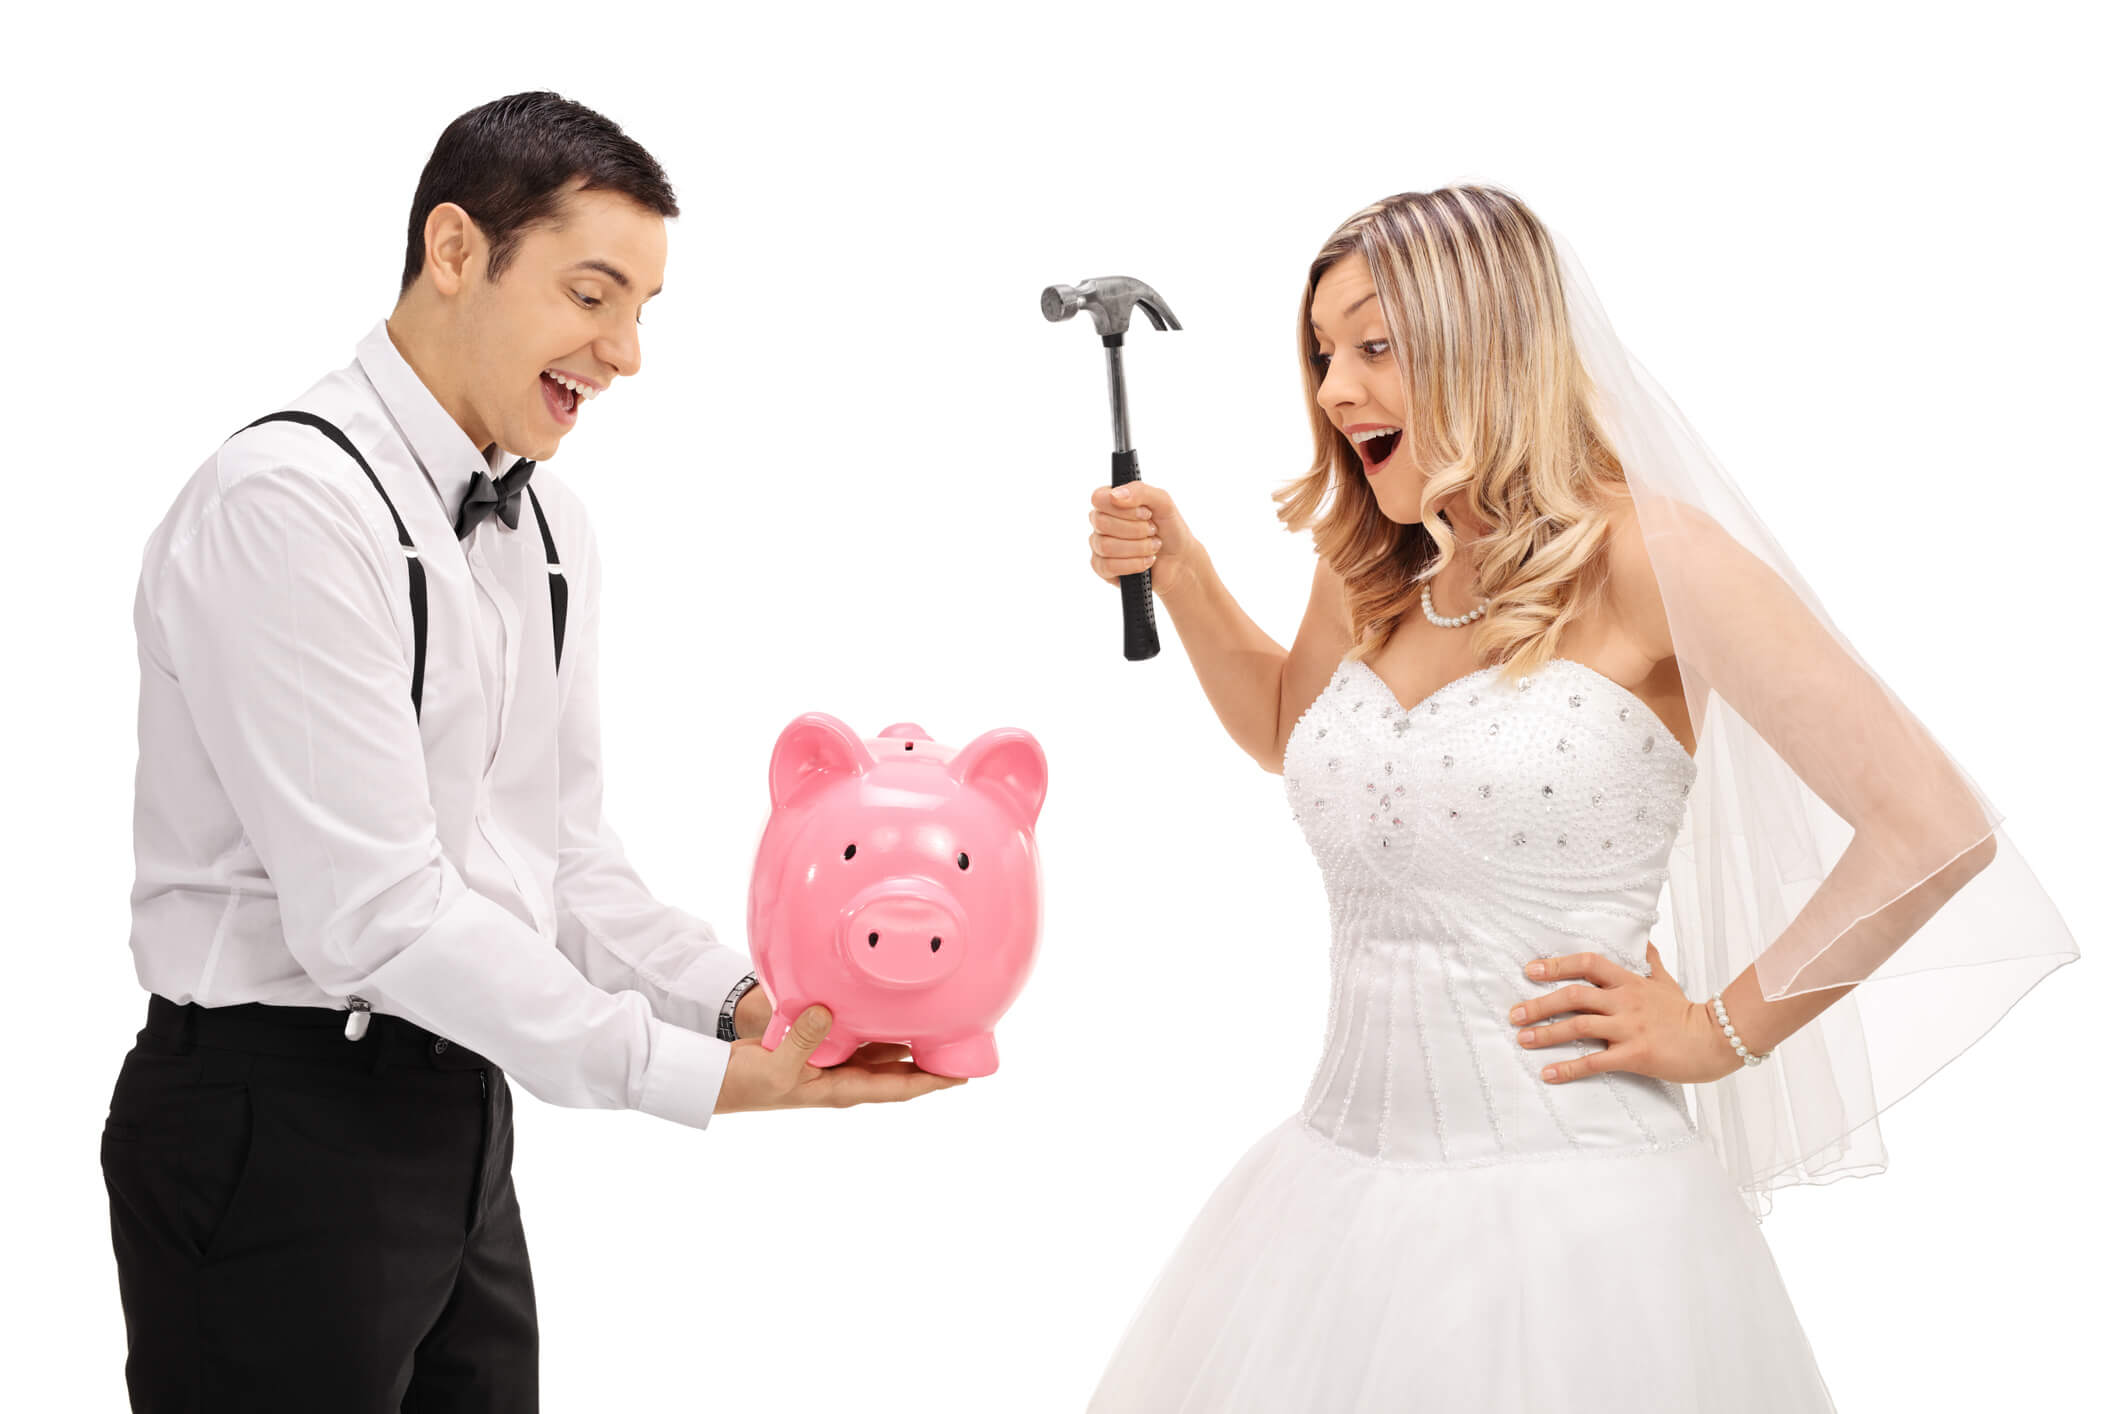 Saving Money on Your Wedding - Complete Controller